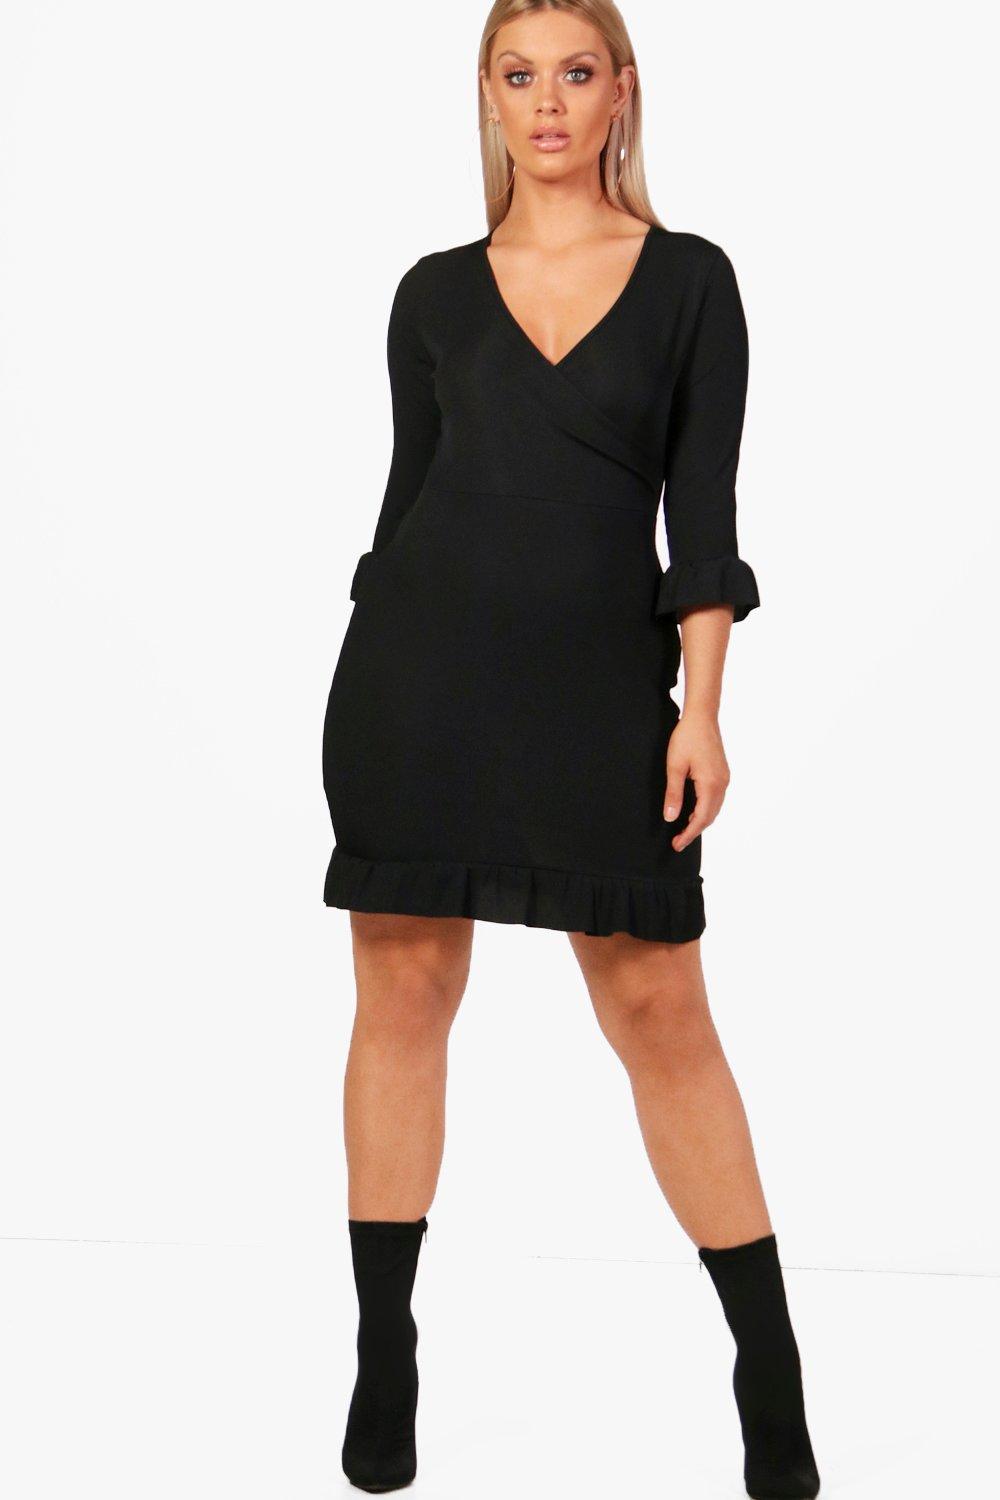 wrap over frill dress